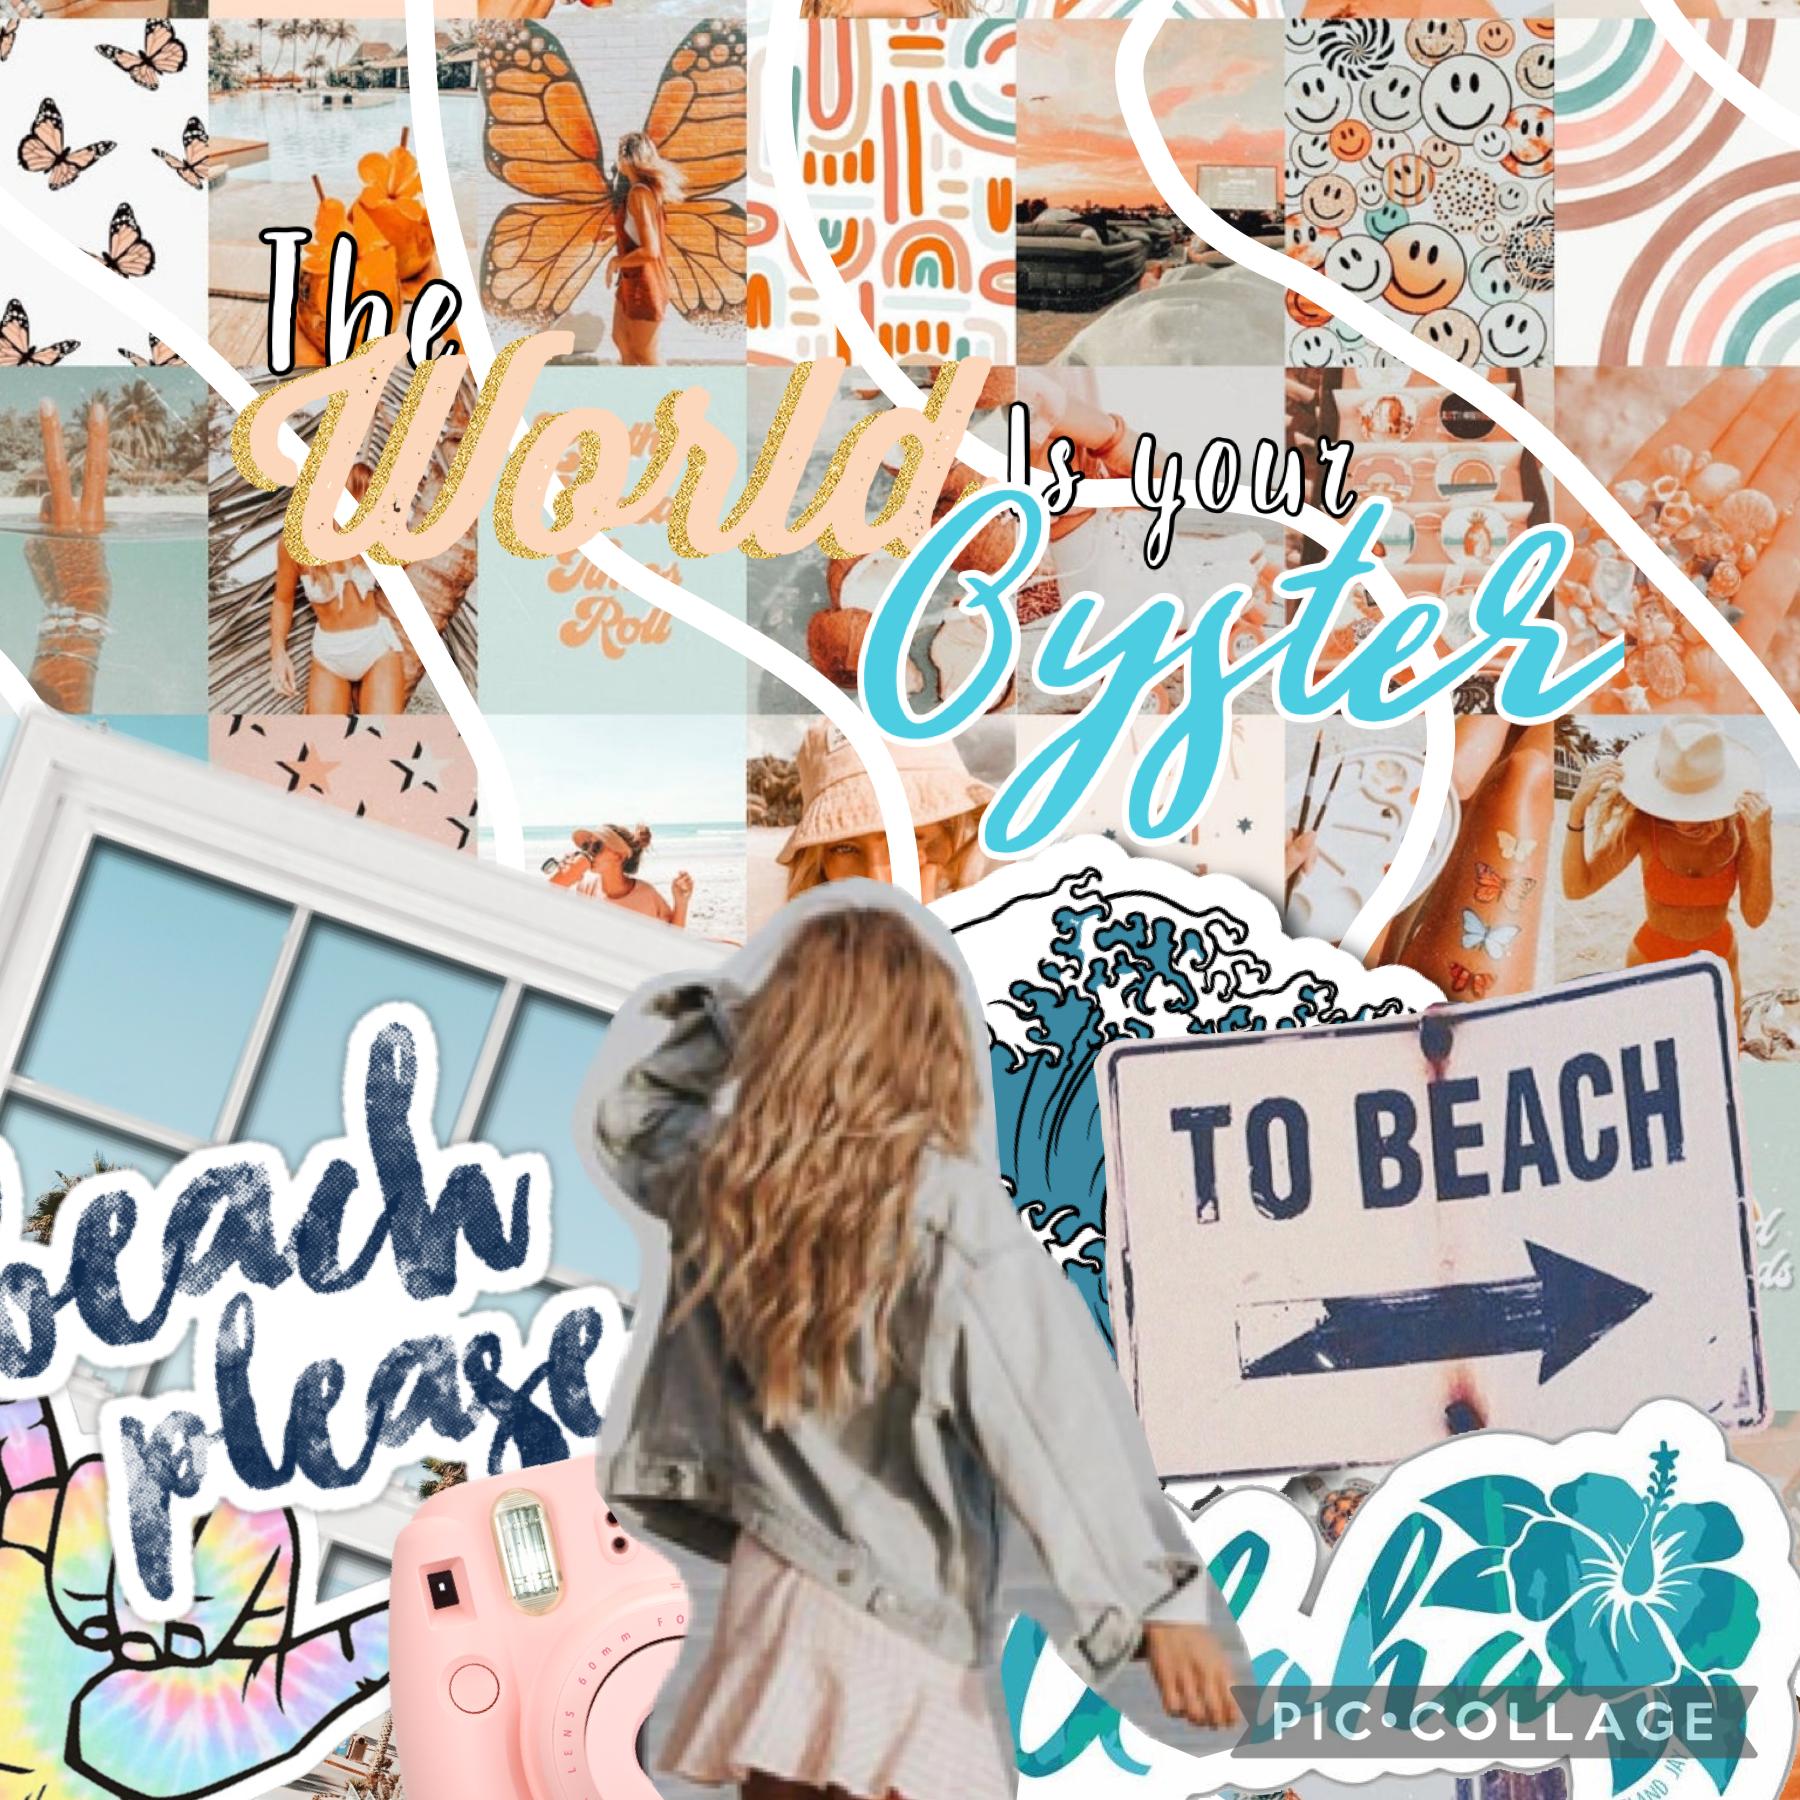 🌺tap🌺
Ok so this collage is basically peachy beachy seasoned we a touch of wanderlust🫠I'm gonna start,and hopfuly remember, doing questions every collage
QUESTION 1-where did you travel lately?